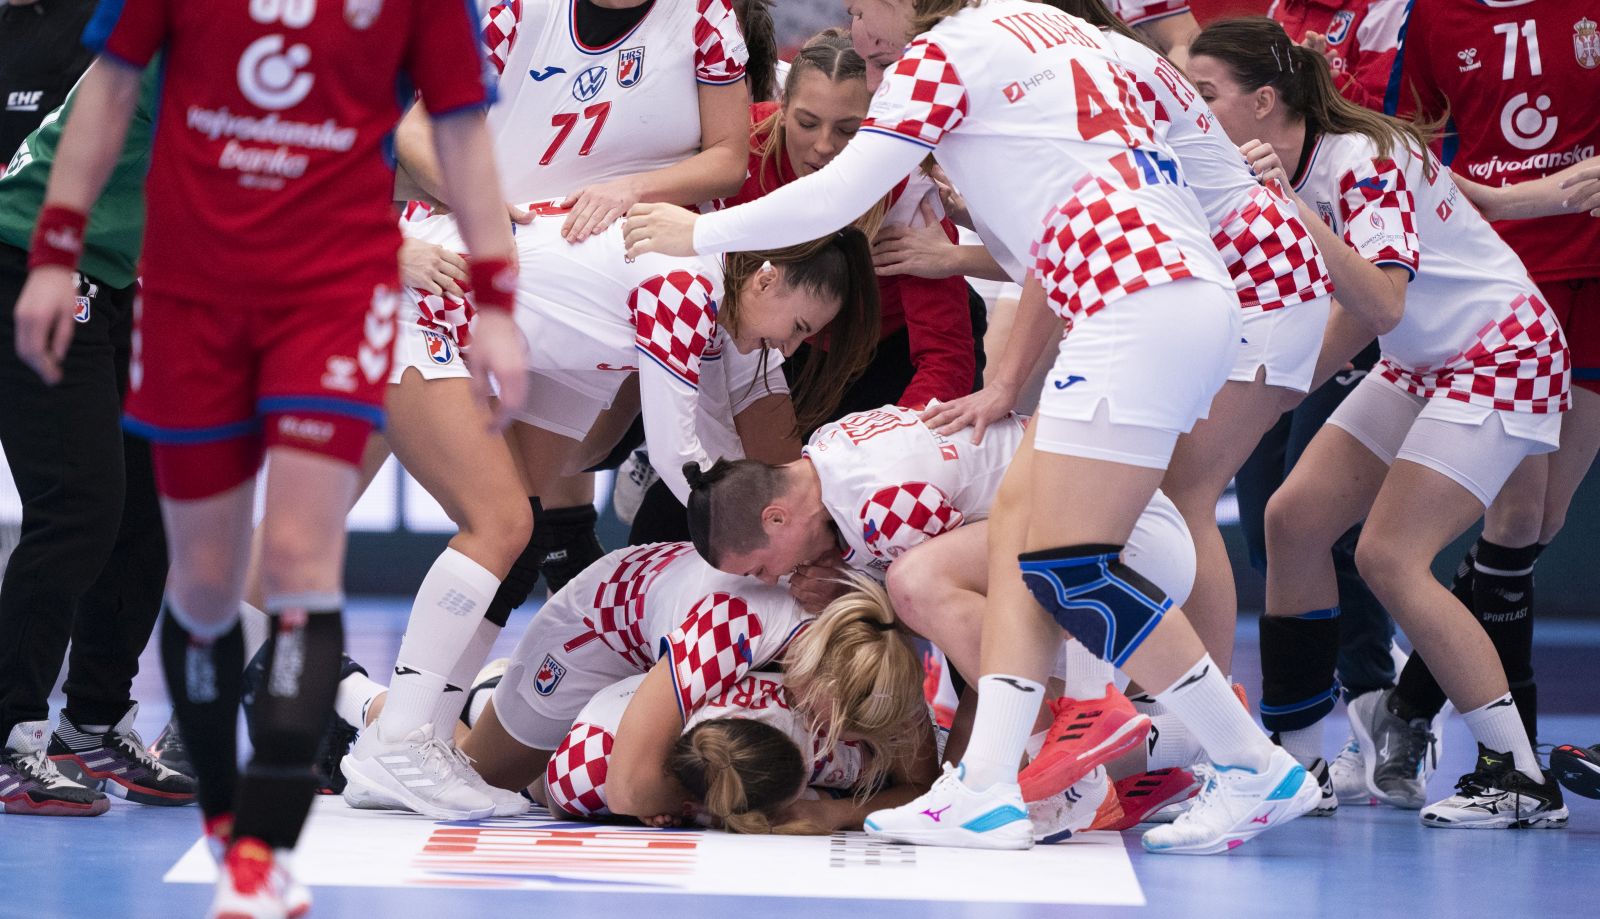 epa08871018 Players of Croatia celebrate after winning the EHF EURO 2020 European Women's Handball preliminary round match between Serbia and Croatia at Sydbank Arena in Kolding in Denmark, 08 December 2020.  EPA/CLAUS FISKER DENMARK OUT